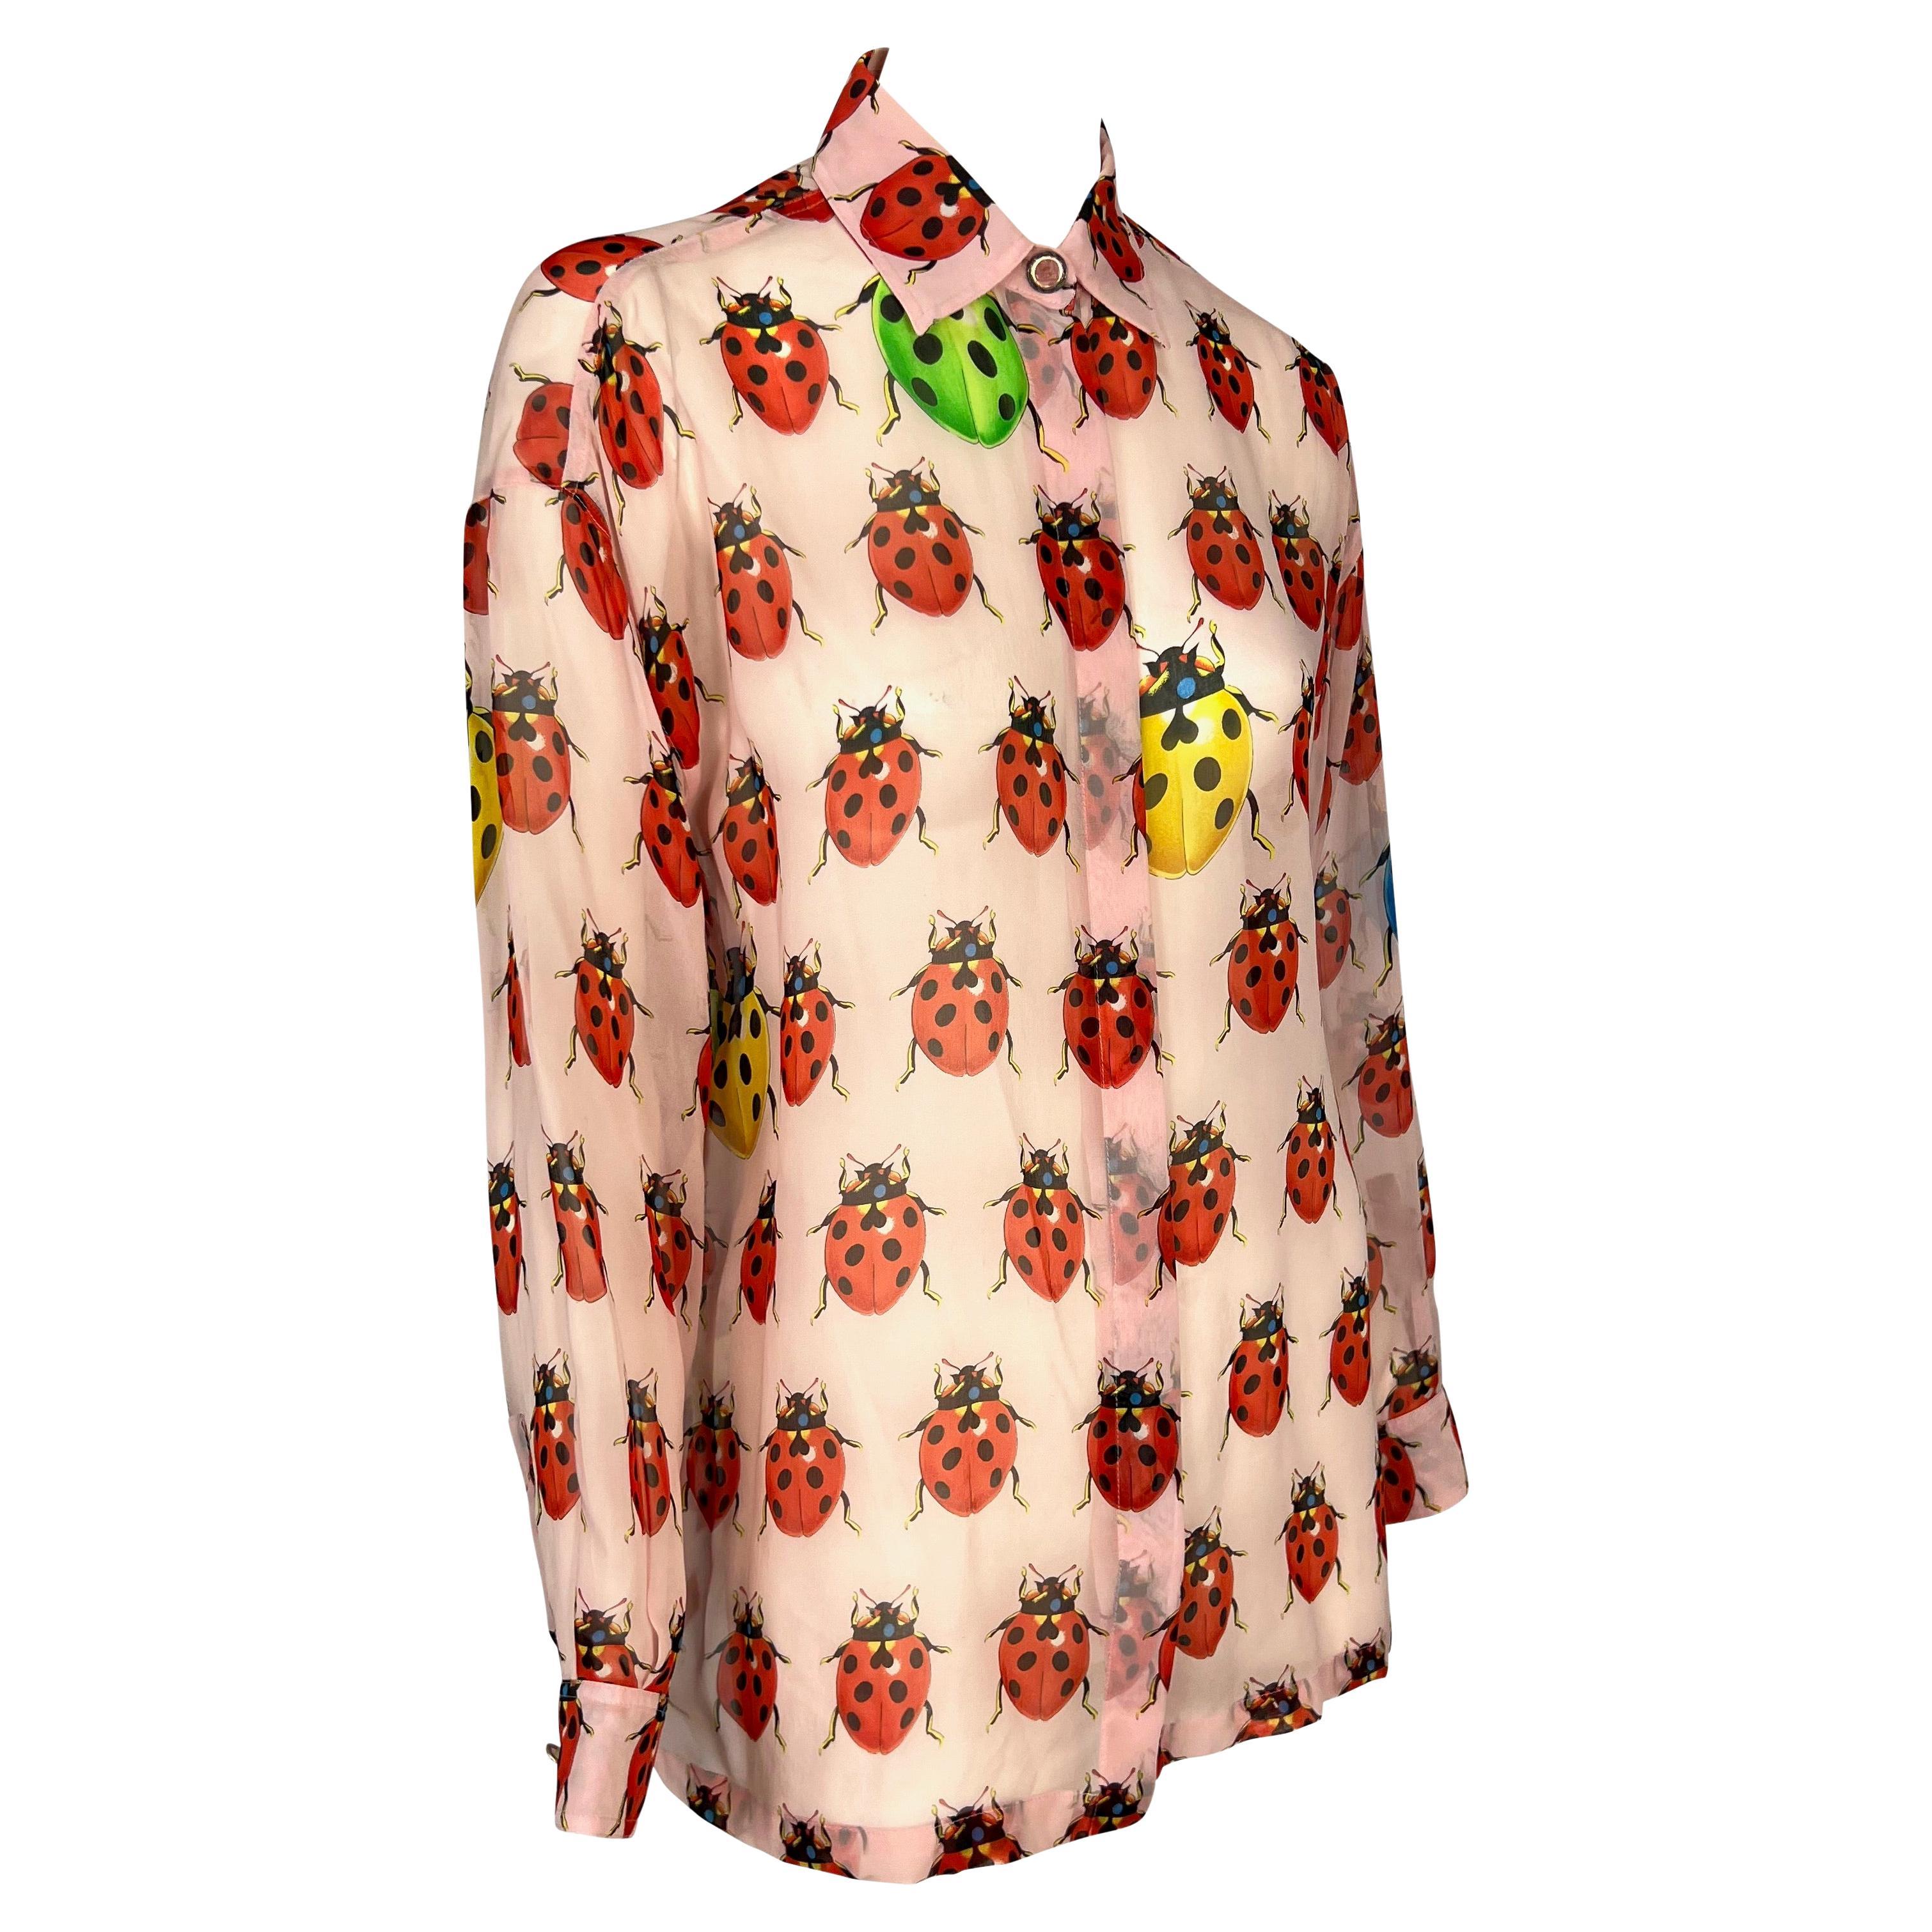 Beige S/S 1995 Gianni Versace Couture Sheer Pink Ladybug Print Medusa Button Blouse For Sale